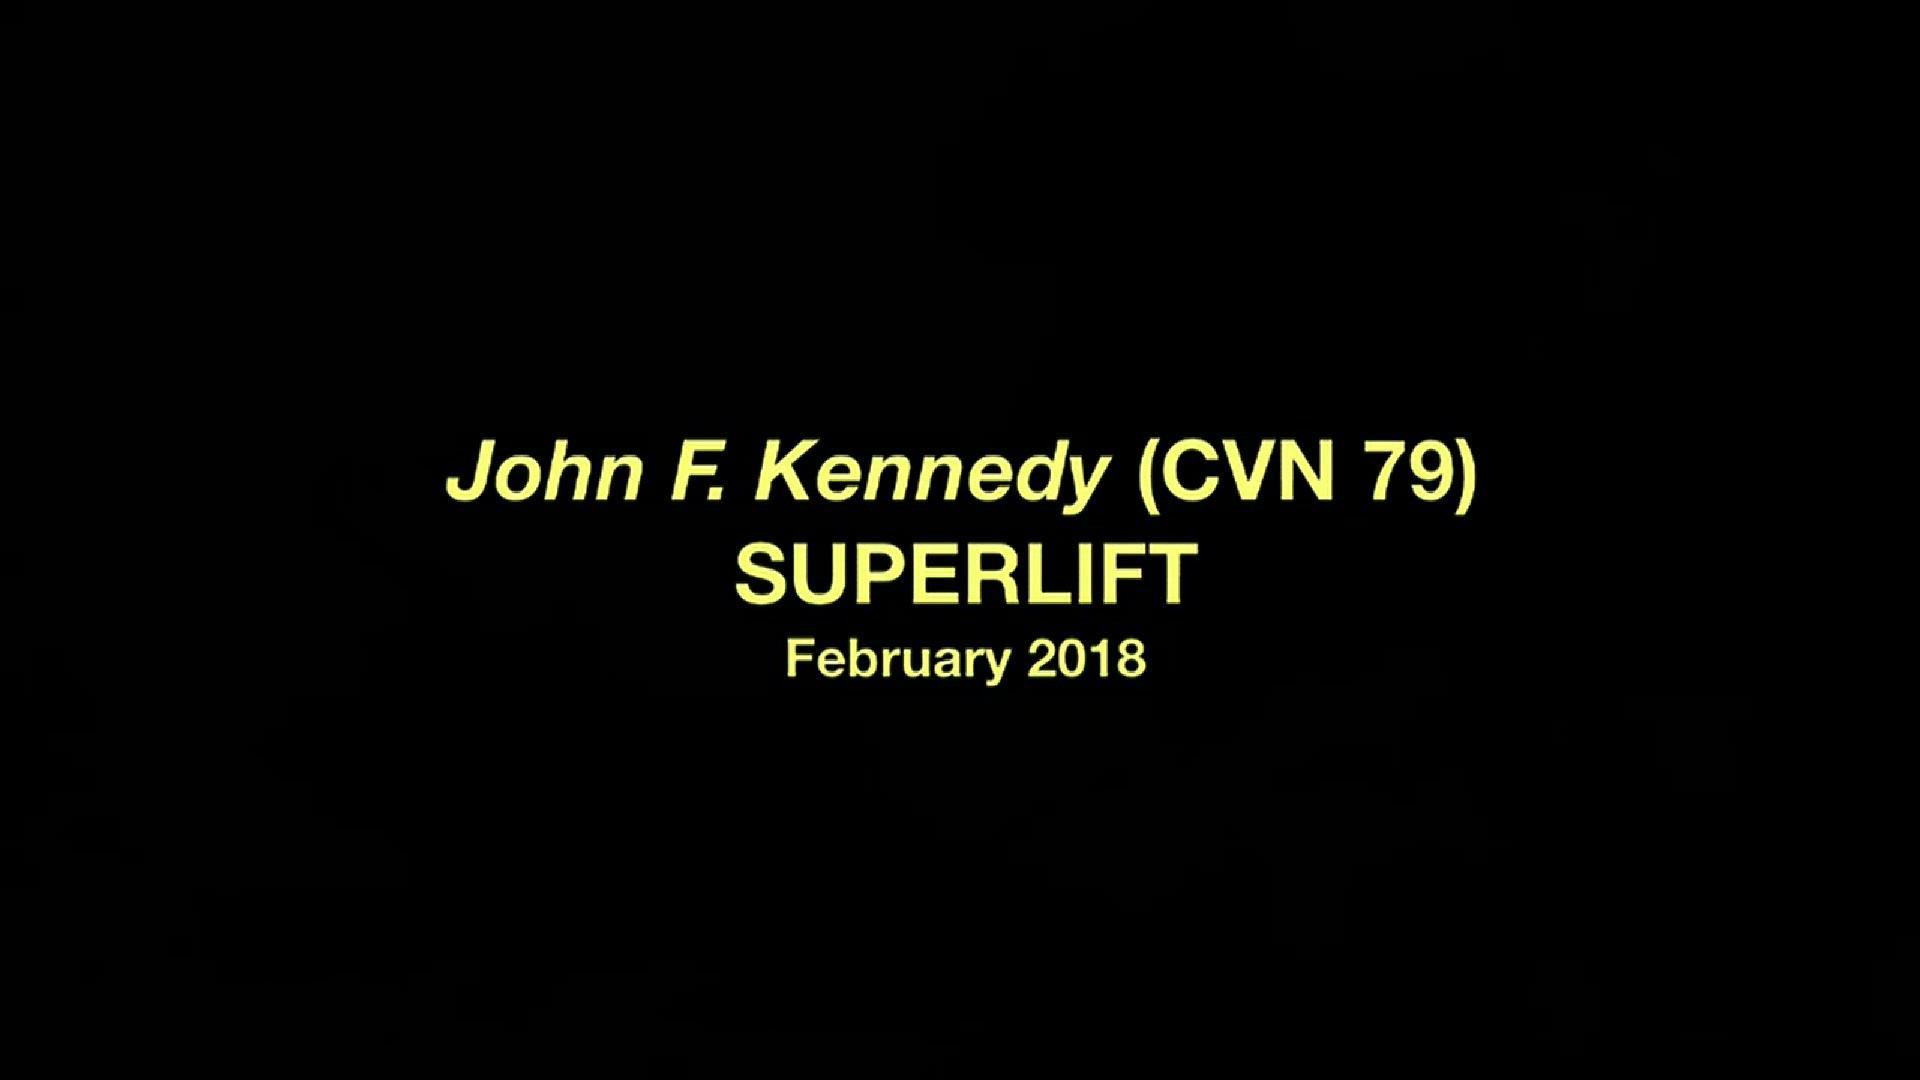 The John F. Kennedy (CVN 79) is the second aircraft carrier in the Ford class, being built at Newport News Shipbuilding. Video courtesy Huntington Ingalls Industries